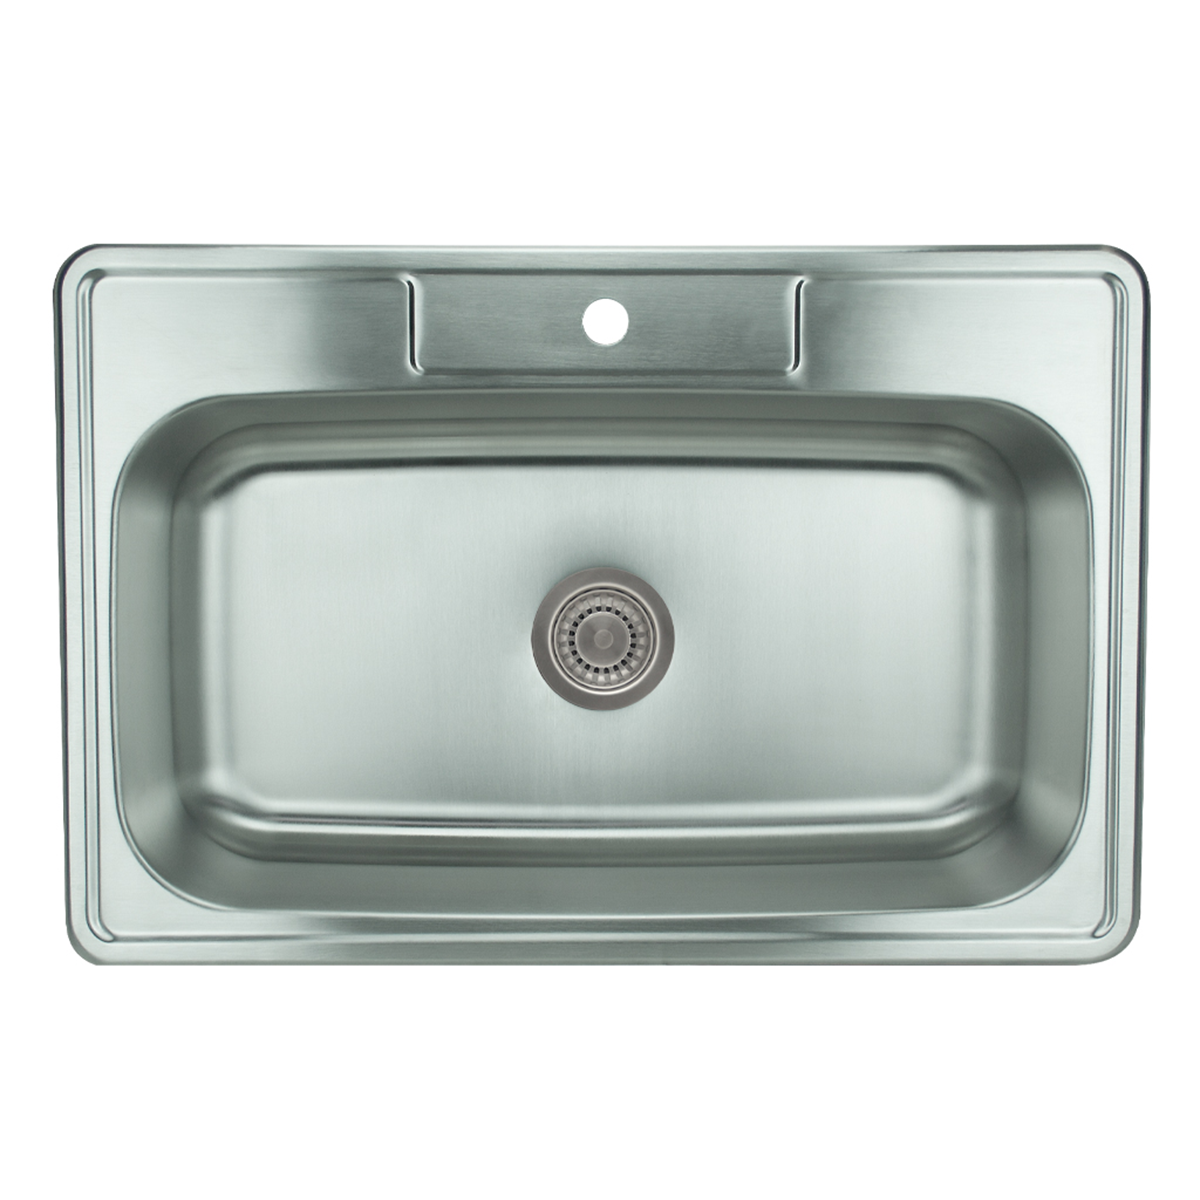 Pelican Int'l Signature Series PL-VT3322 18 Gauge Stainless Steel Single Bowl Topmount Kitchen Sink 33" x 22" with 1 Hole